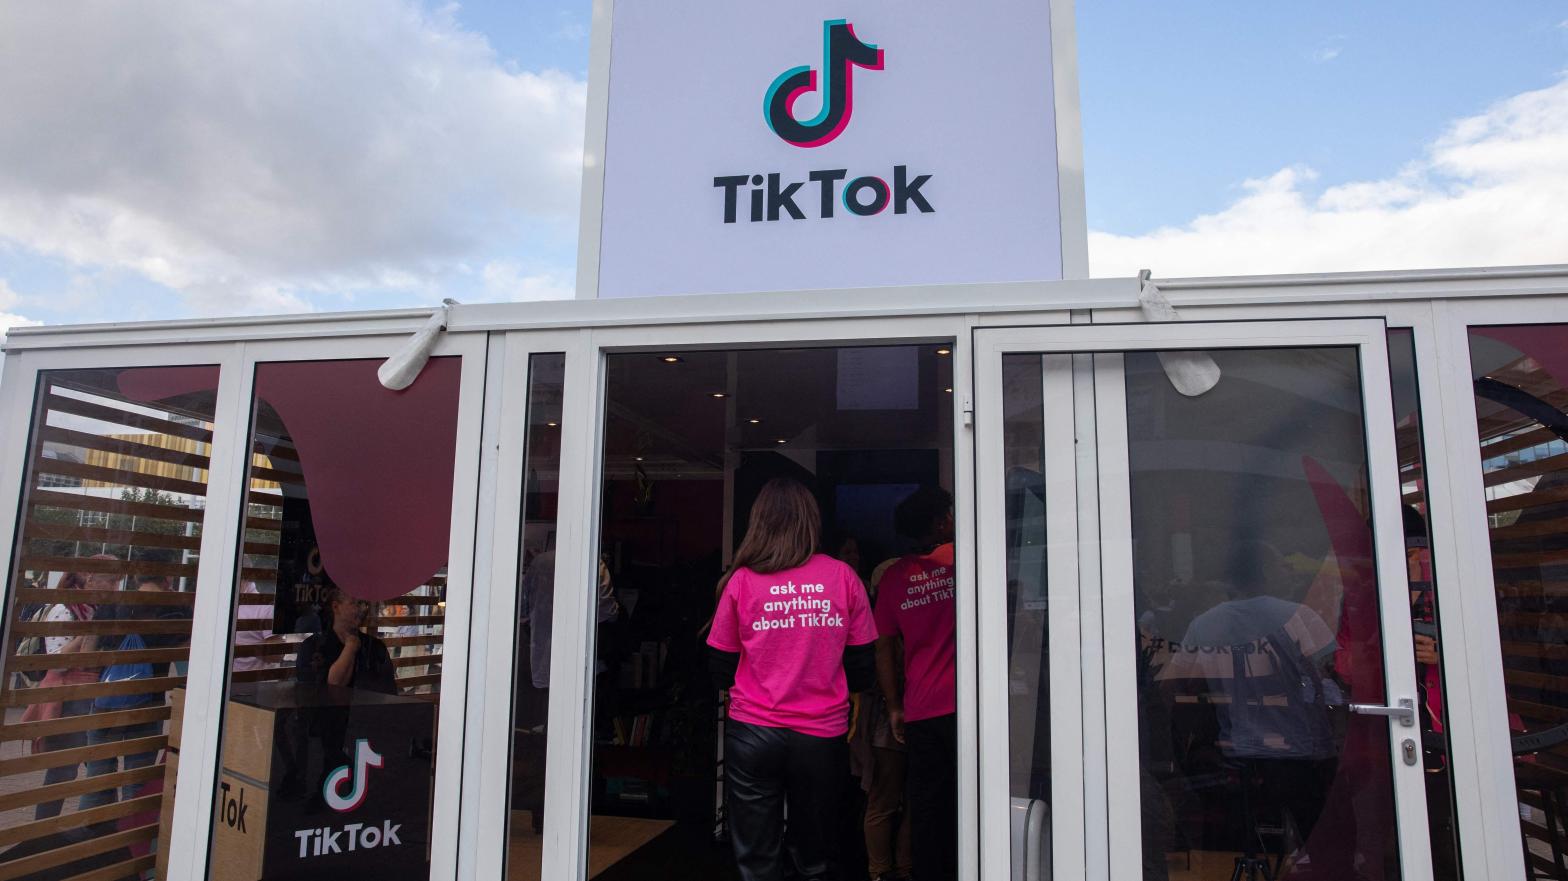 TikTok hosted its own booth at a book fair in Frankfurt, Germany last month, but its own plans for shopping on the app are as ambitious as they are potentially invasive. (Photo: ANDRE PAIN/AFP, Getty Images)